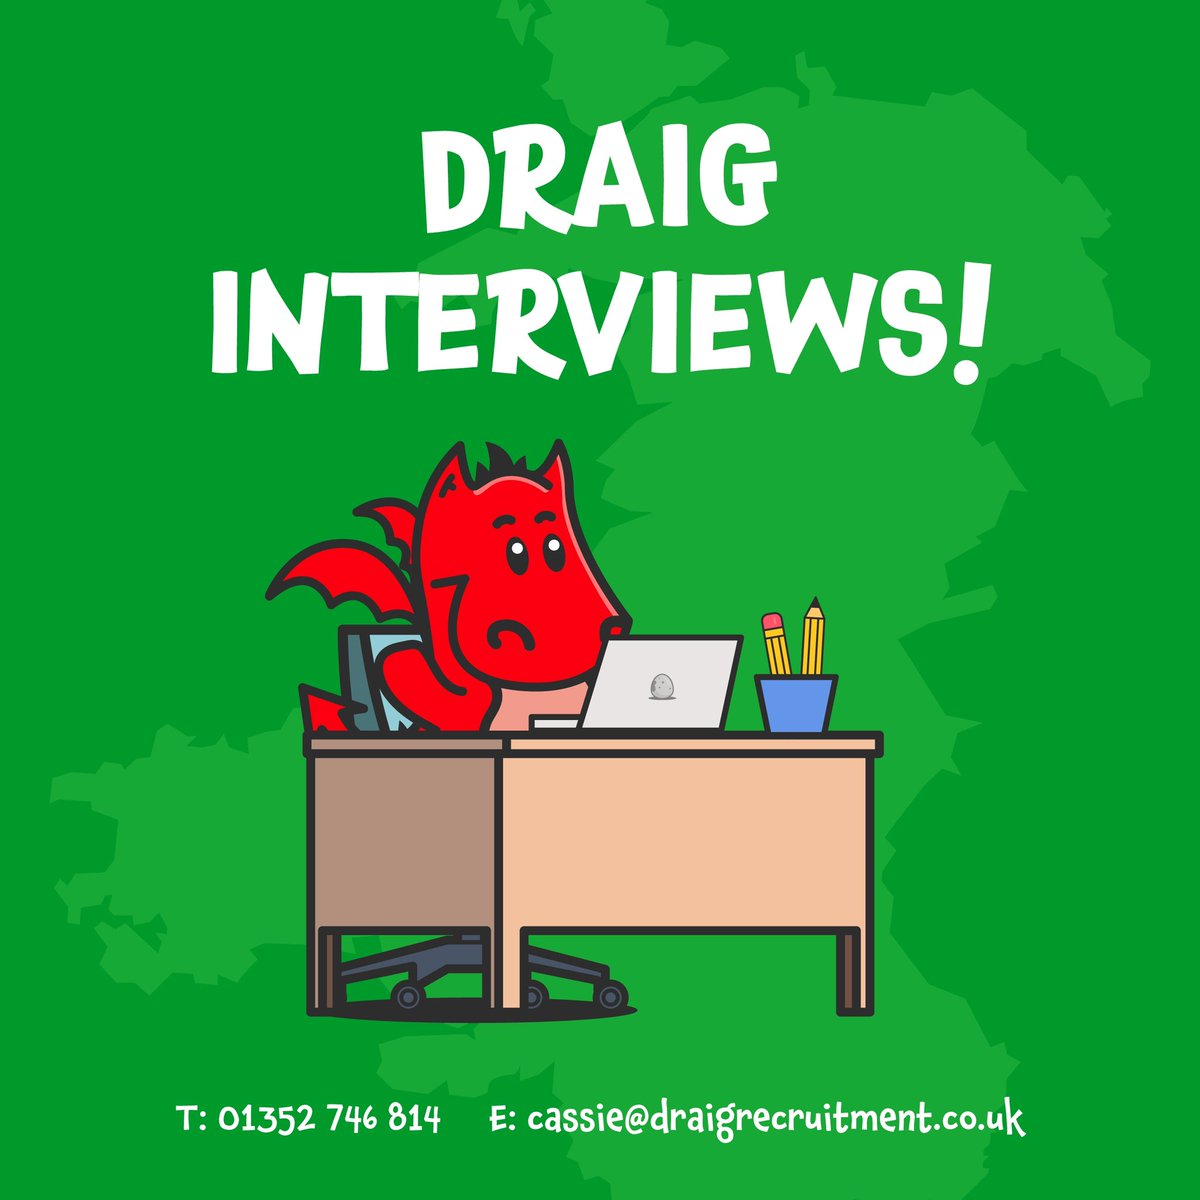 We have been busy interviewing for jobs to start in September. If you are a Teacher or Teaching Assistant or know anyone in education looking for work contact us info@draigrecruitment.co.uk 
#NWalesHour #NorthWalesSocial